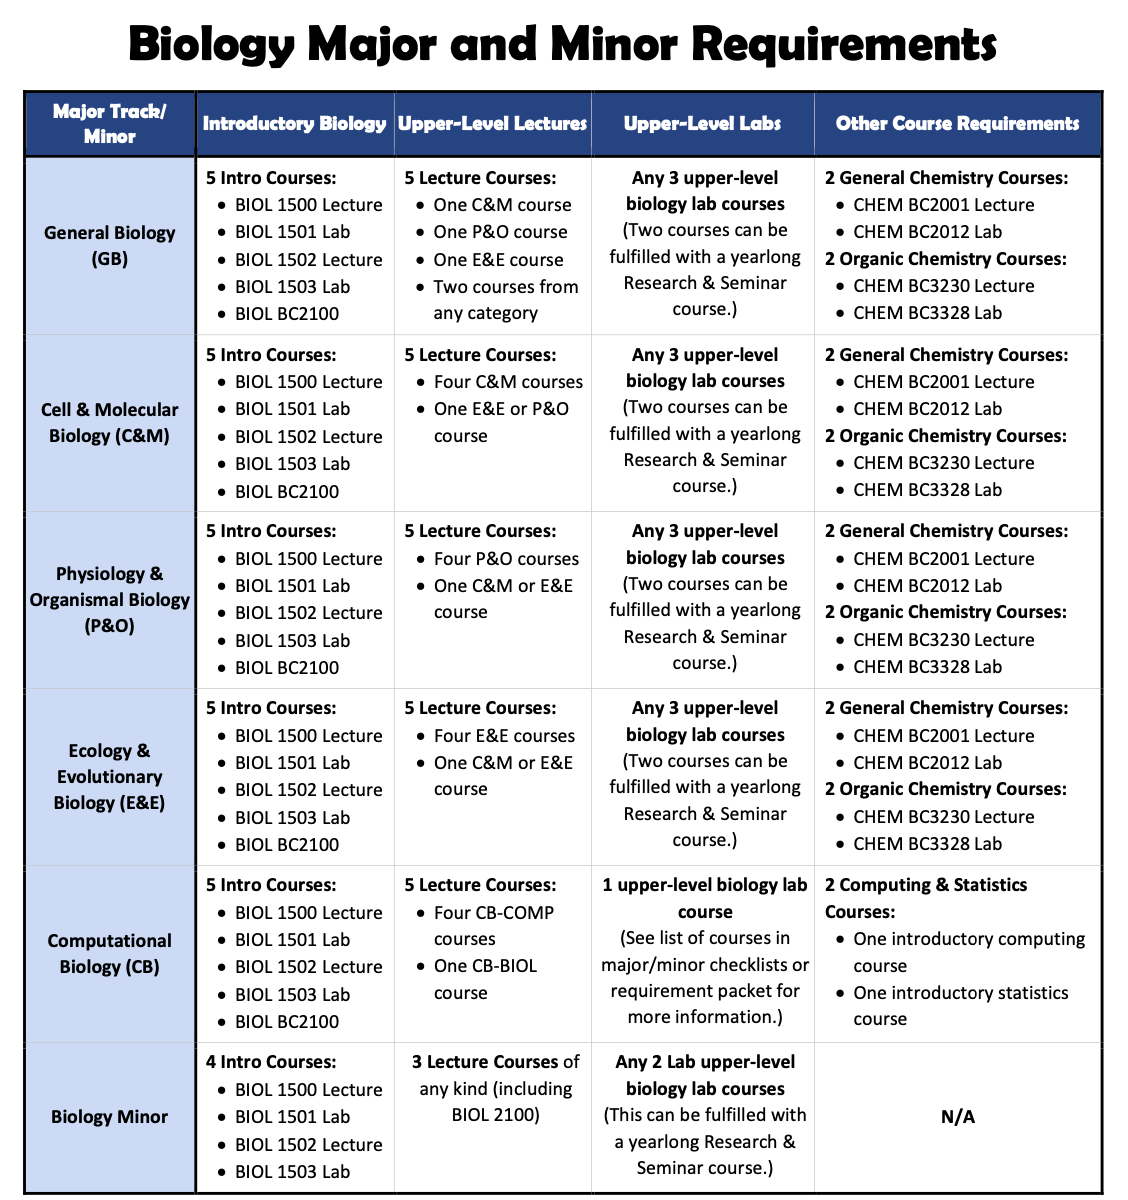 Biology majors and minor comparison table with course requirements